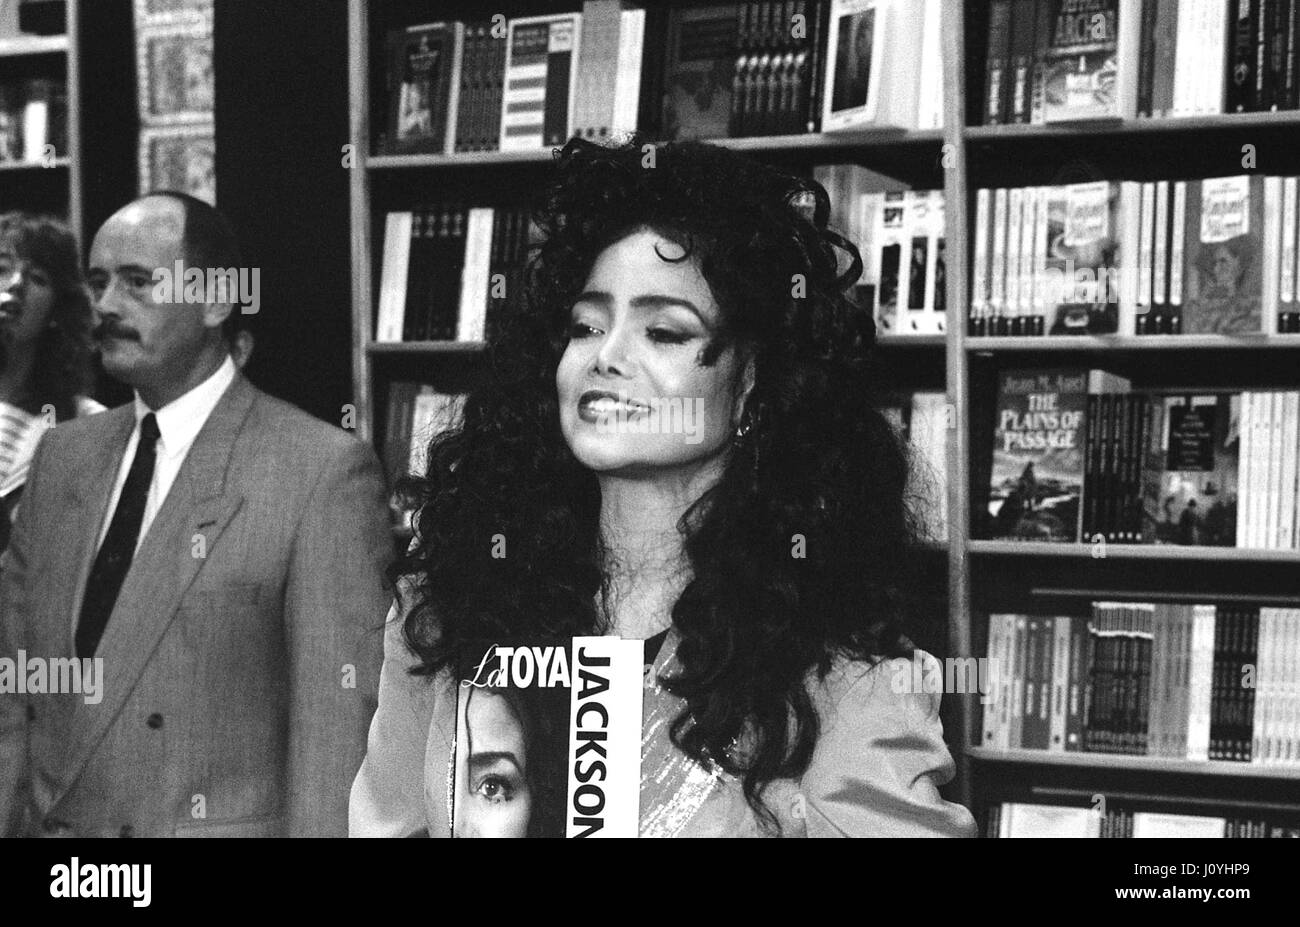 La Toya Jackson, U.S. pop singer and sister of Michael Jackson, attends a book signing event in London, England on September 26, 1991. Stock Photo